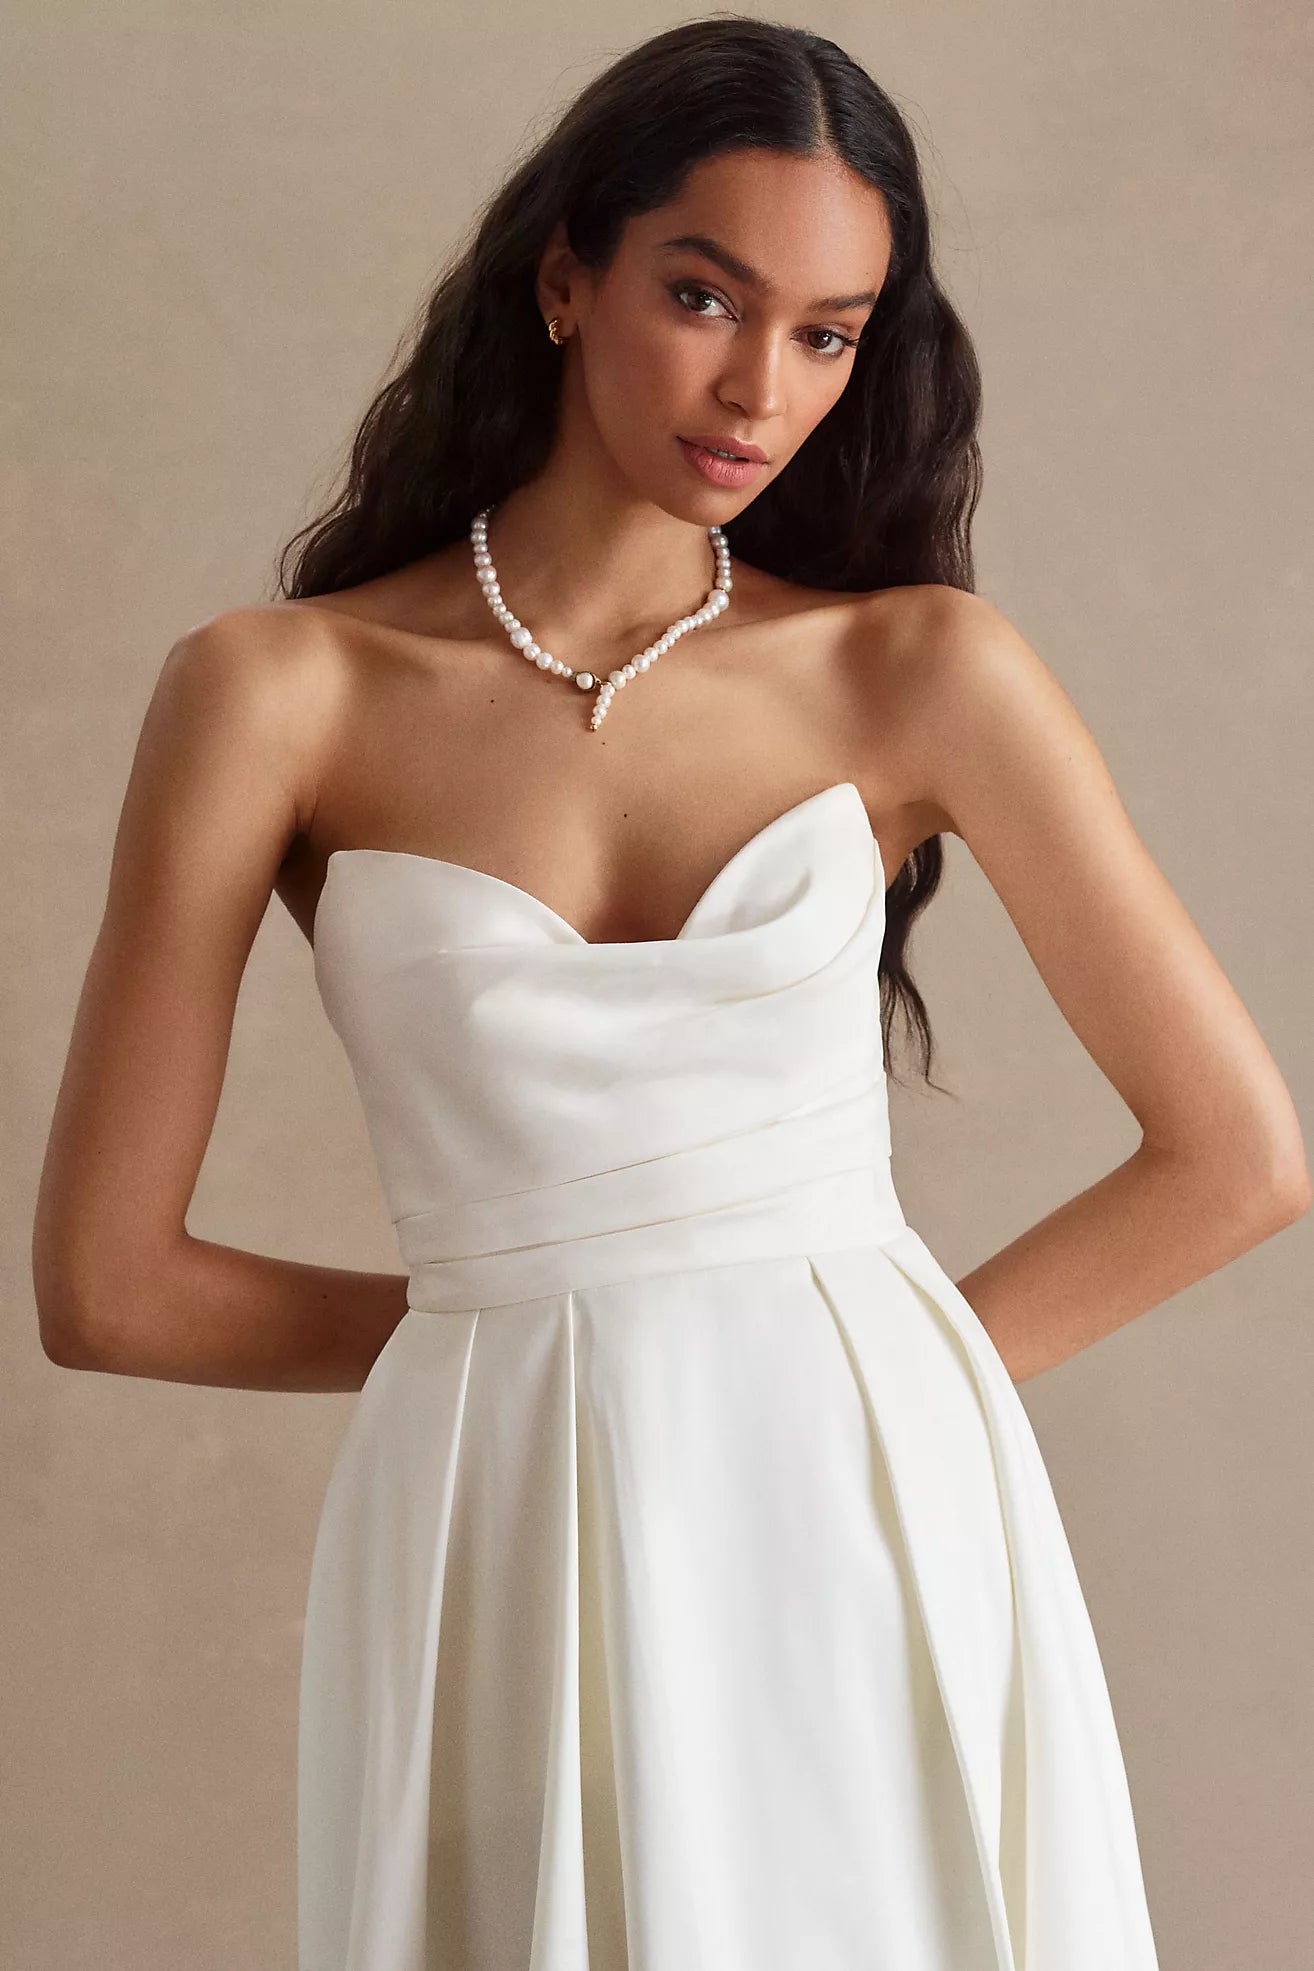 How to Choose The Best Small Bust Wedding Dresses - Lula Lu Blog